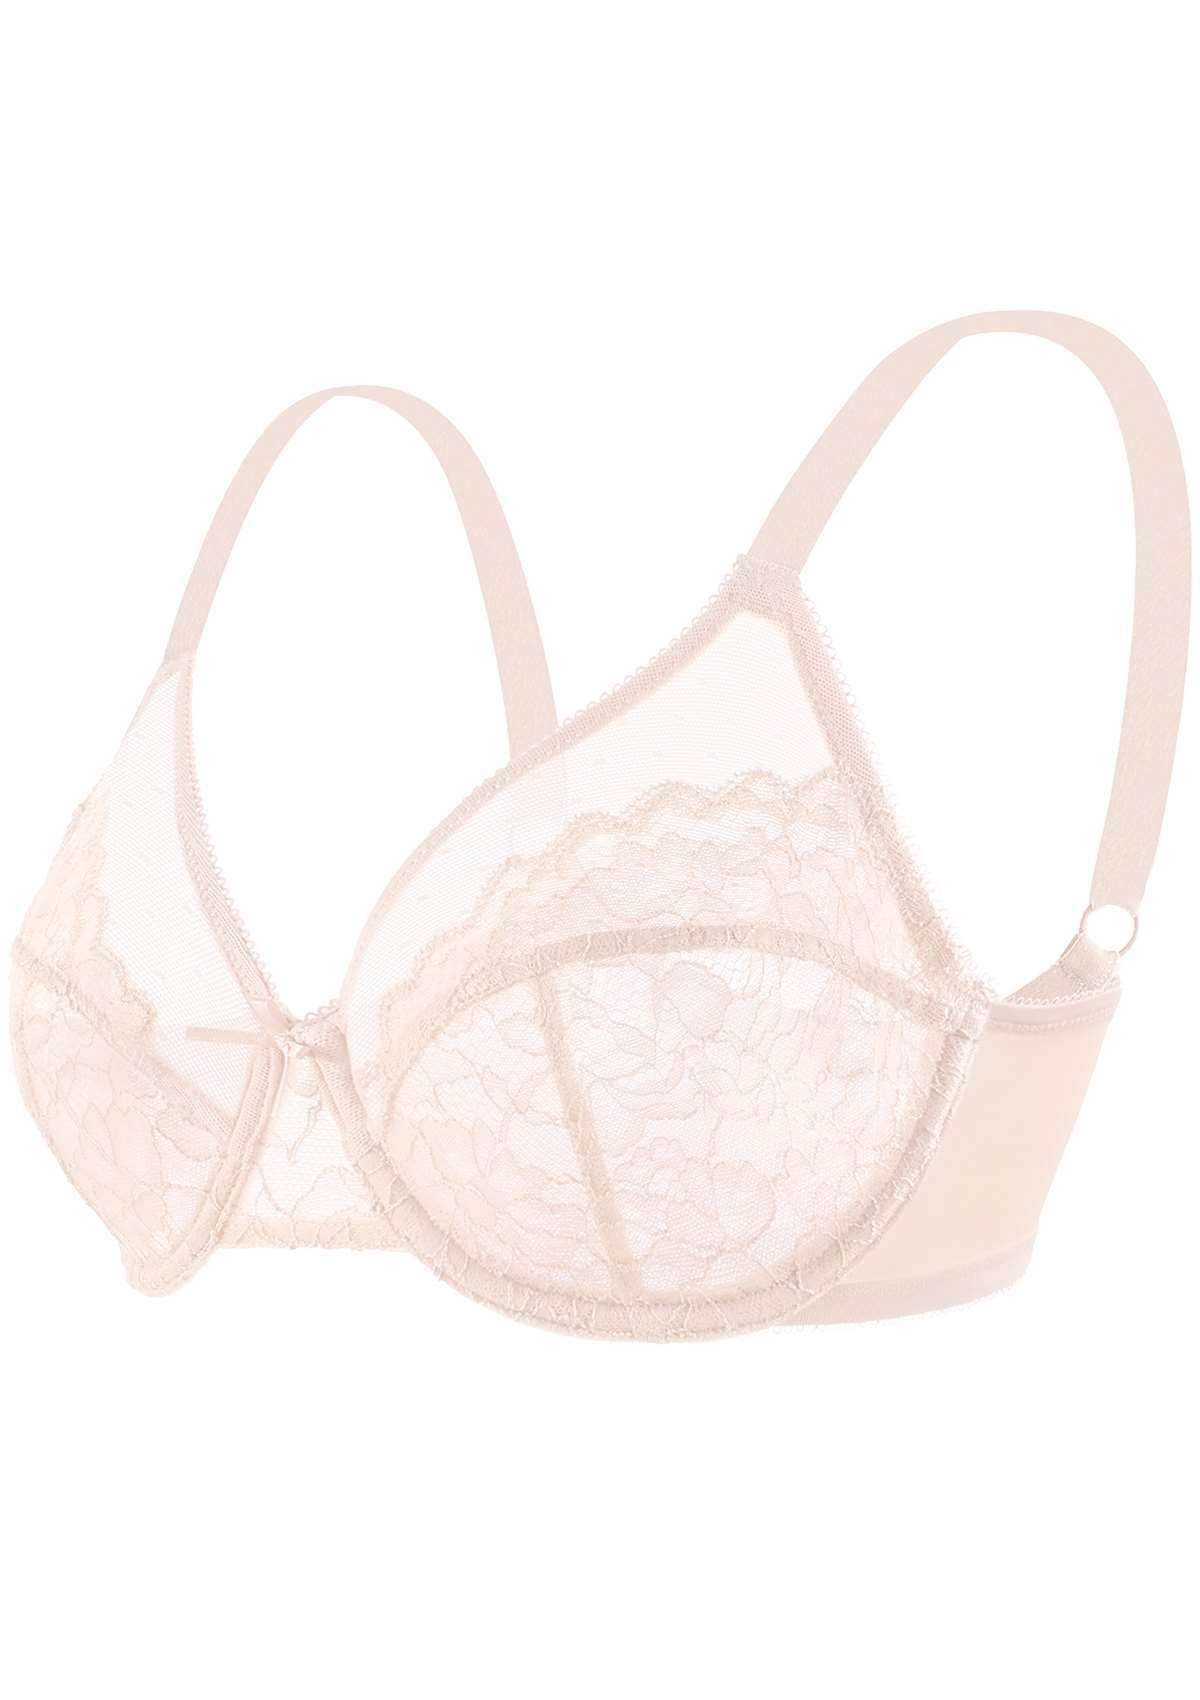 HSIA Enchante Lacy Bra: Comfy Sheer Lace Bra With Lift - Dusty Peach / 34 / H